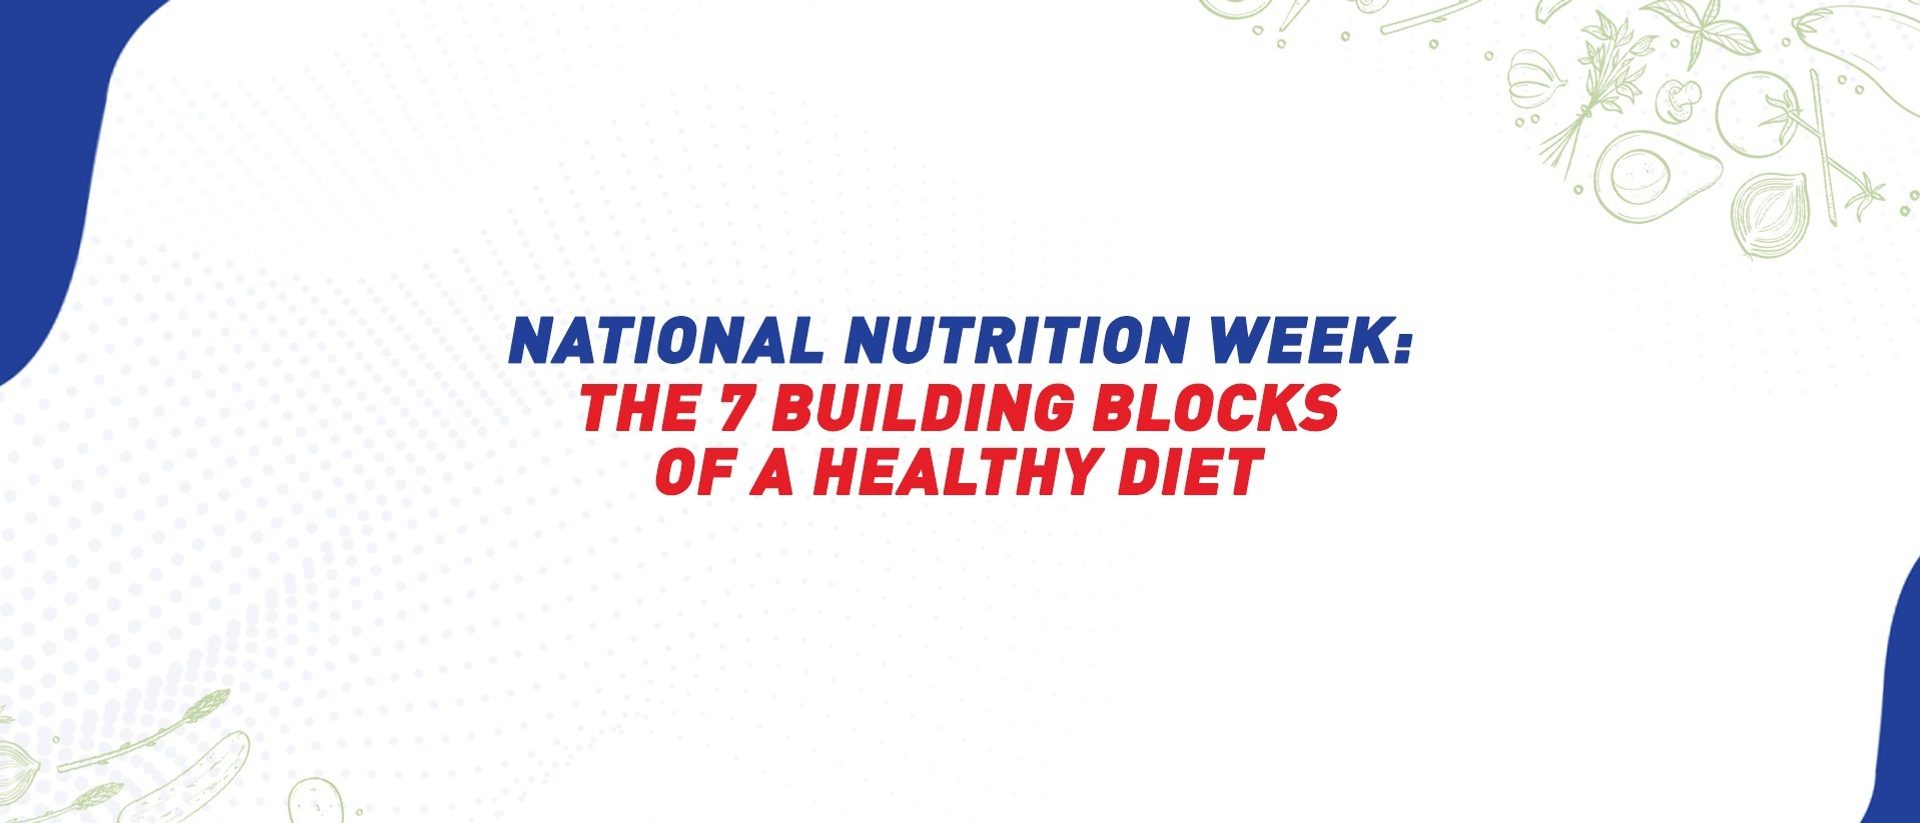 National Nutrition Week: The 7 Building Blocks of A Healthy Diet